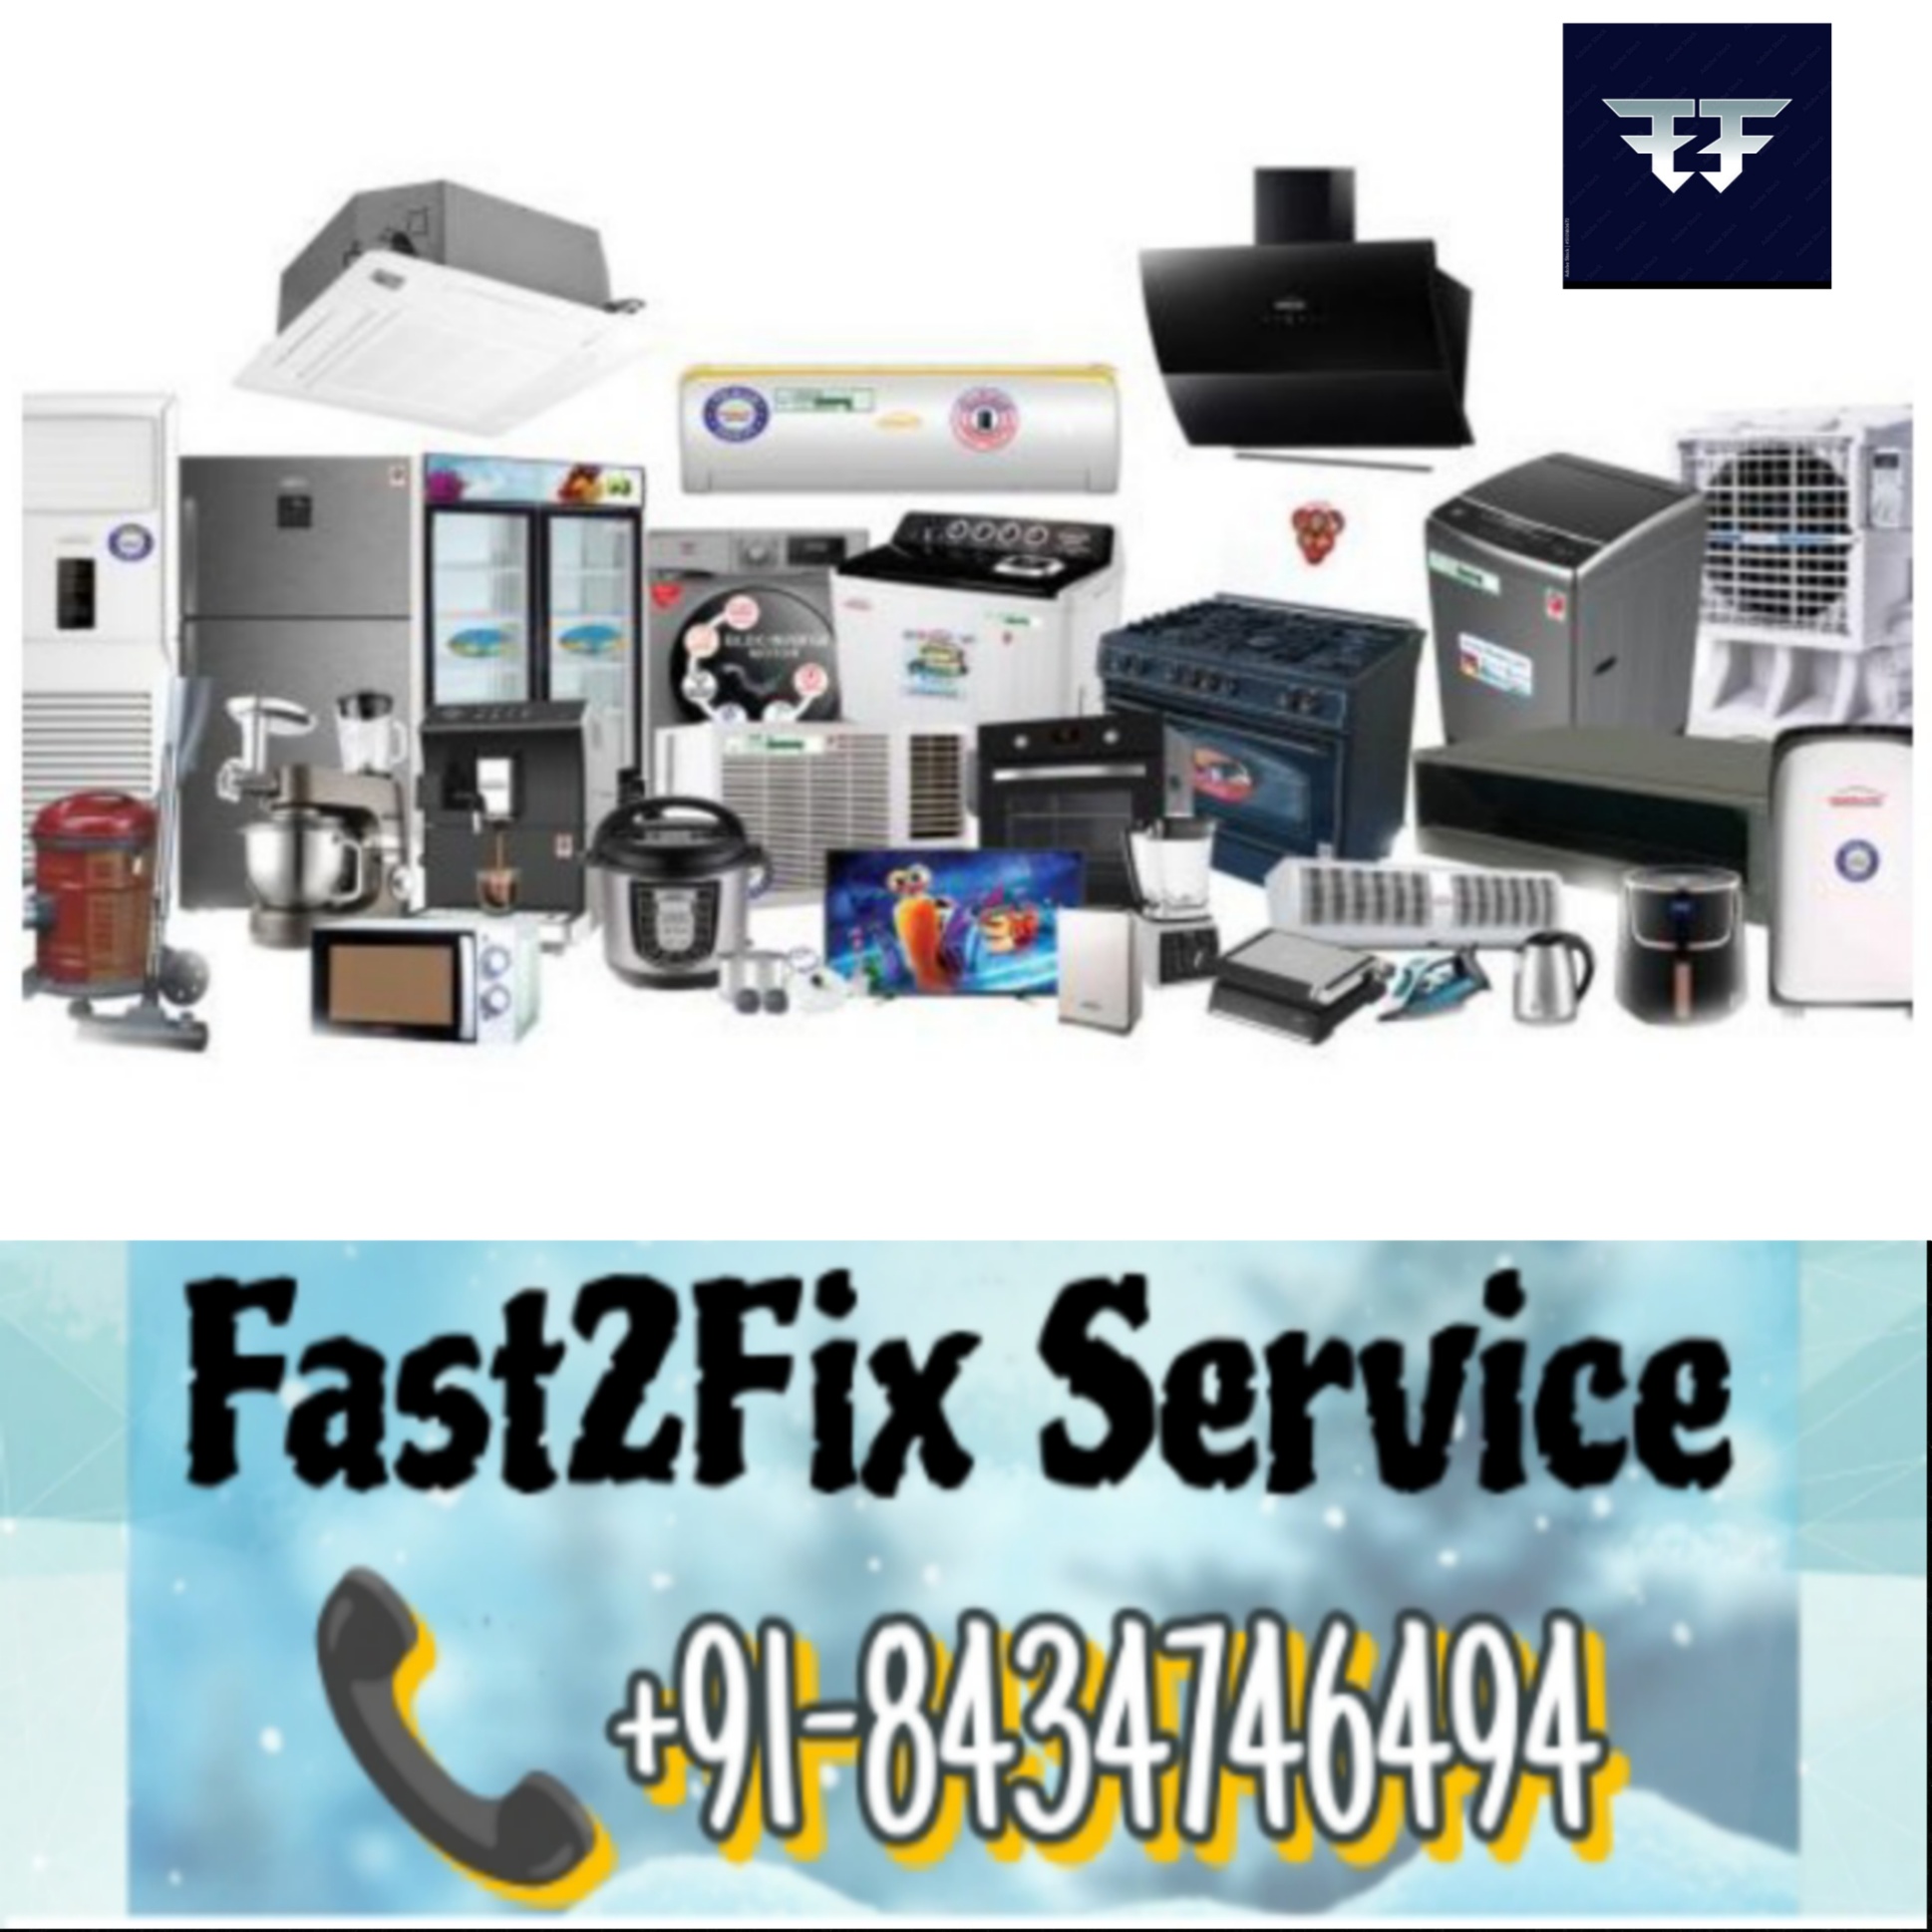 All appliances sell service